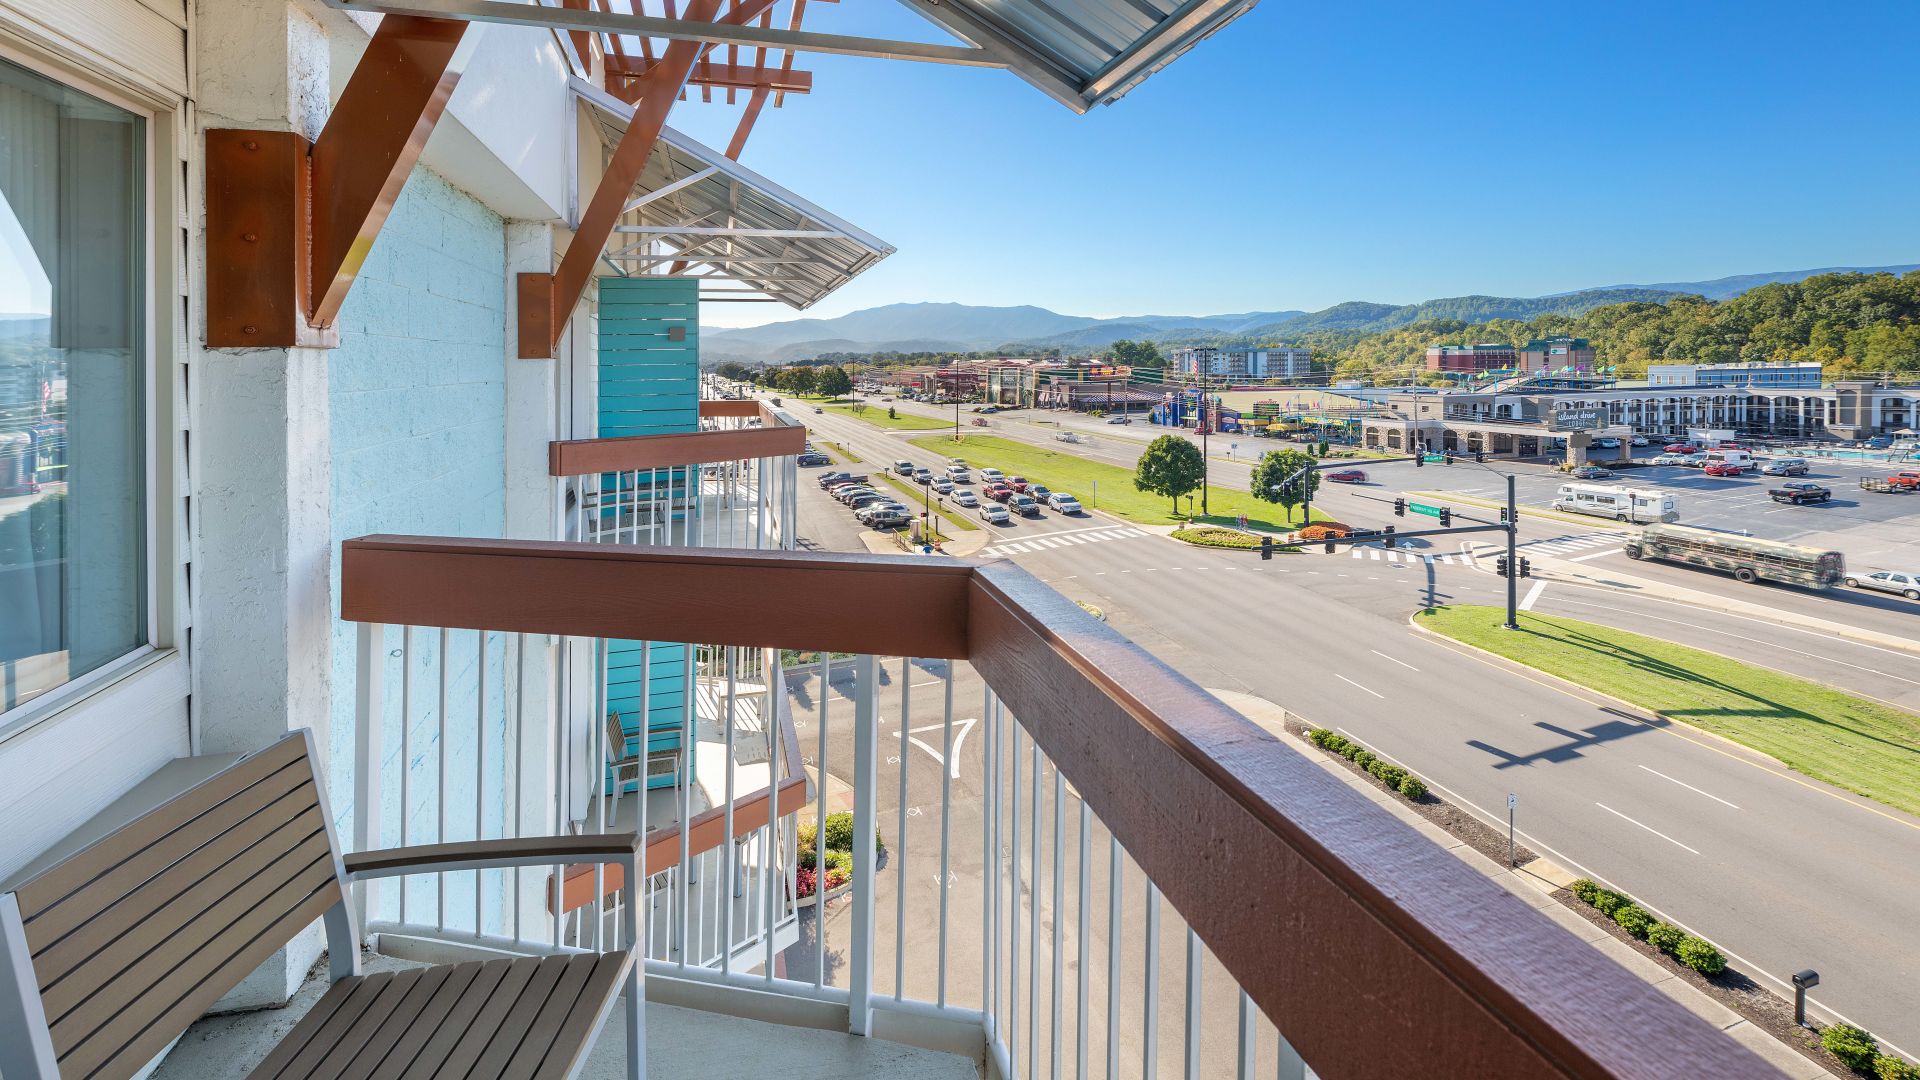 Pigeon Forge Hotel with Balcony